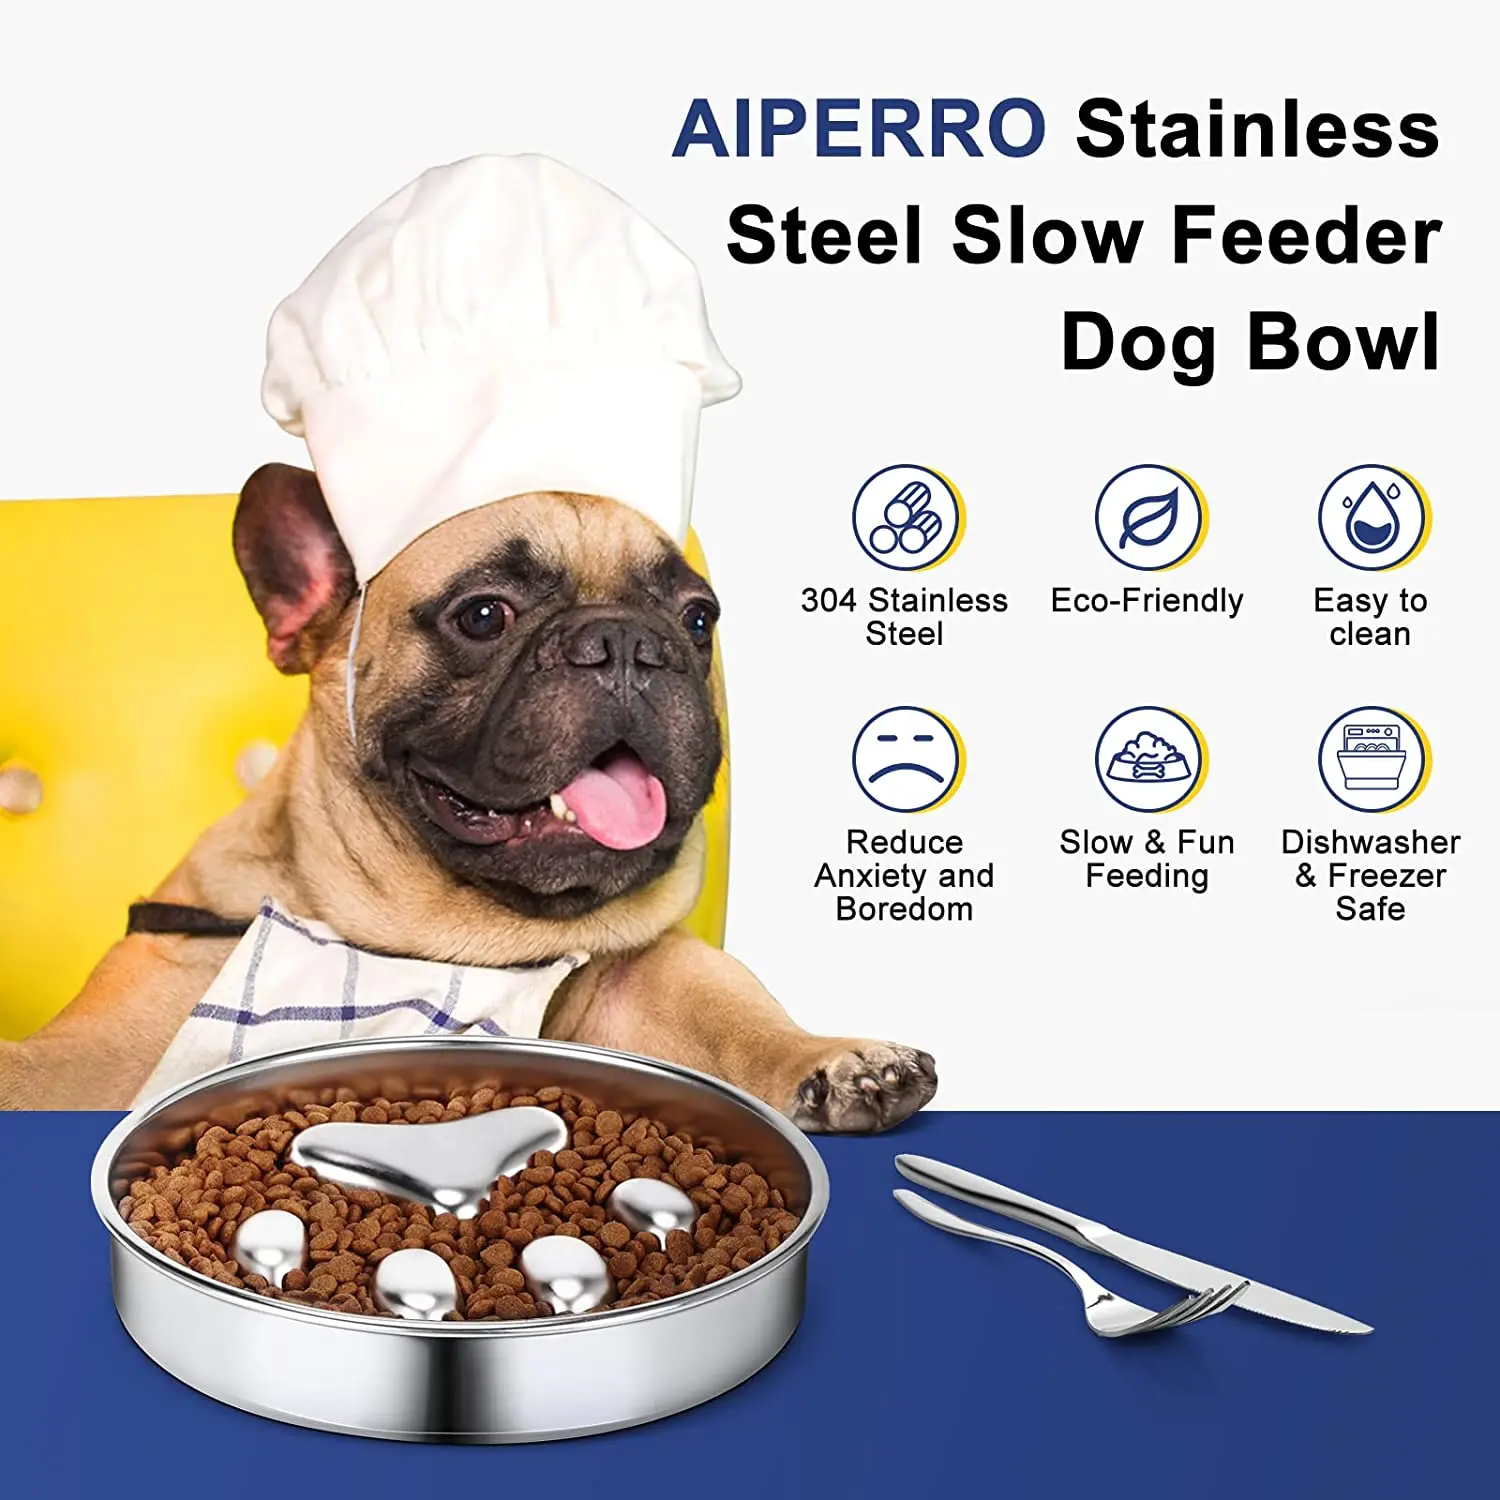 https://ae01.alicdn.com/kf/Sb5af6fbc285f4876880f86bc1ed43616B/304-Stainless-Steel-Slow-Feeder-Dog-Bowls-Metal-Dog-Food-Bowls-Water-Bowl-for-Small-and.jpg